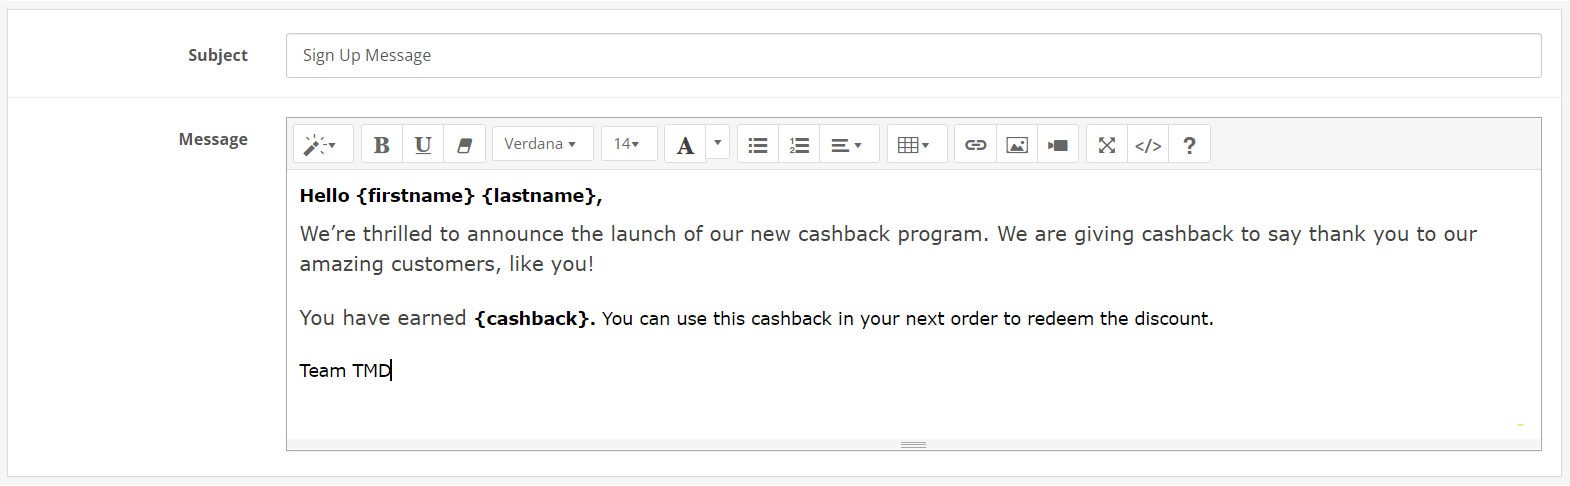 opencart cashback email template module